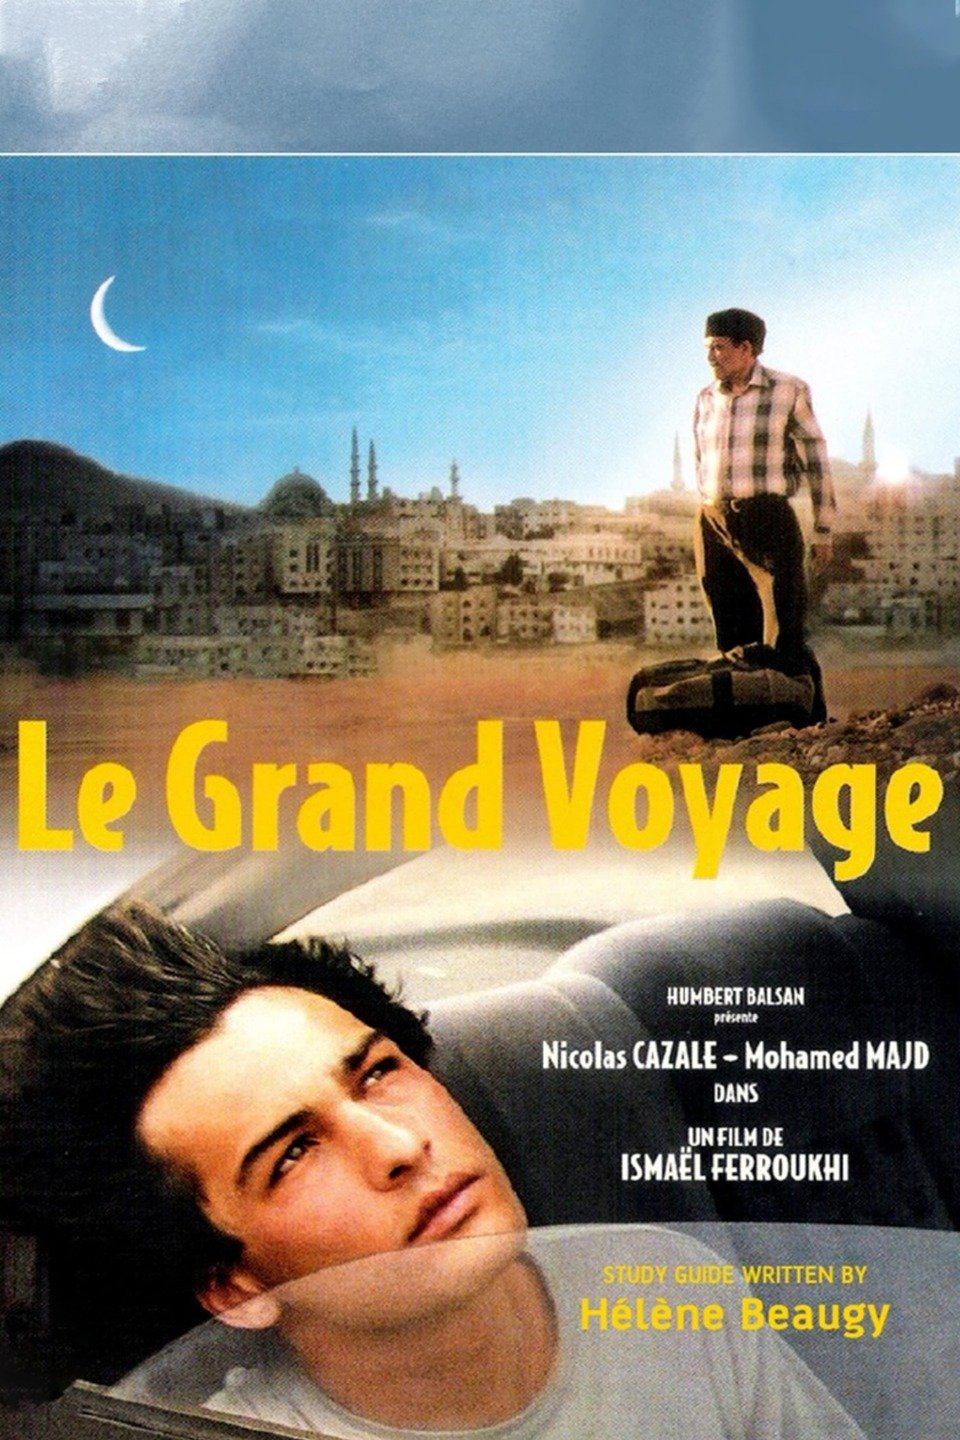 le grand voyage full movie download